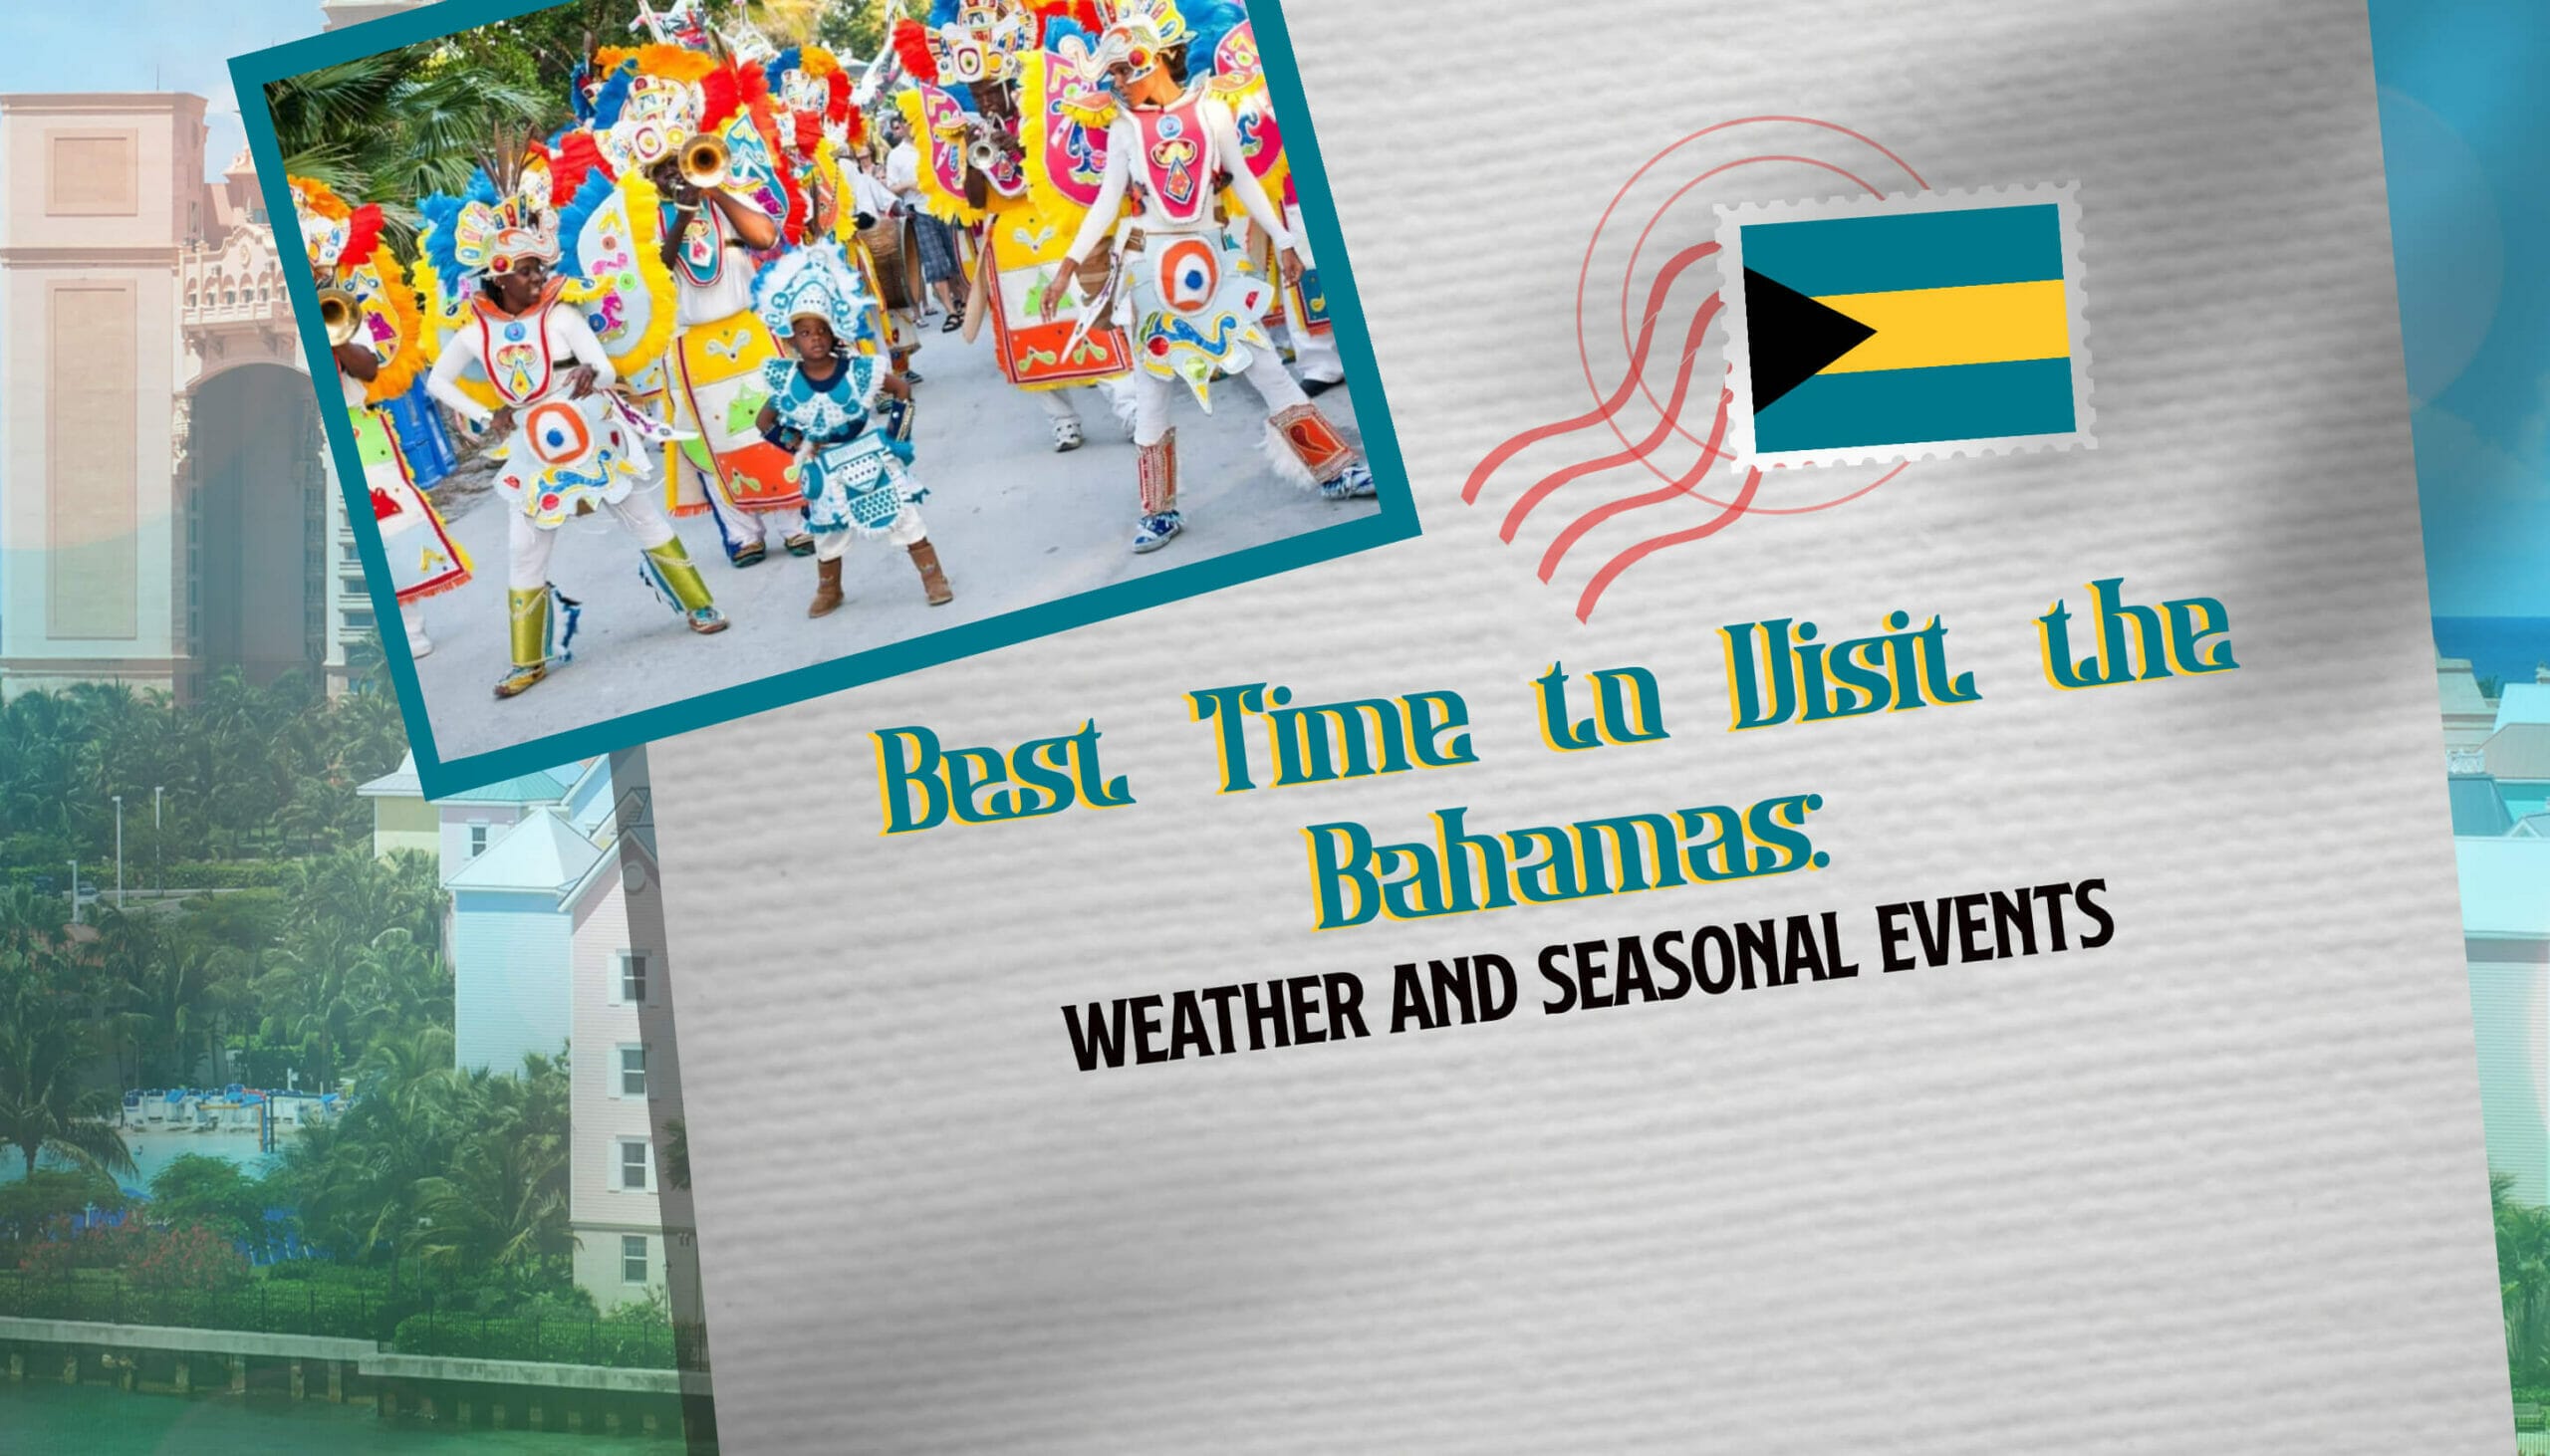 Best Time to Visit the Bahamas Weather and Seasonal Events